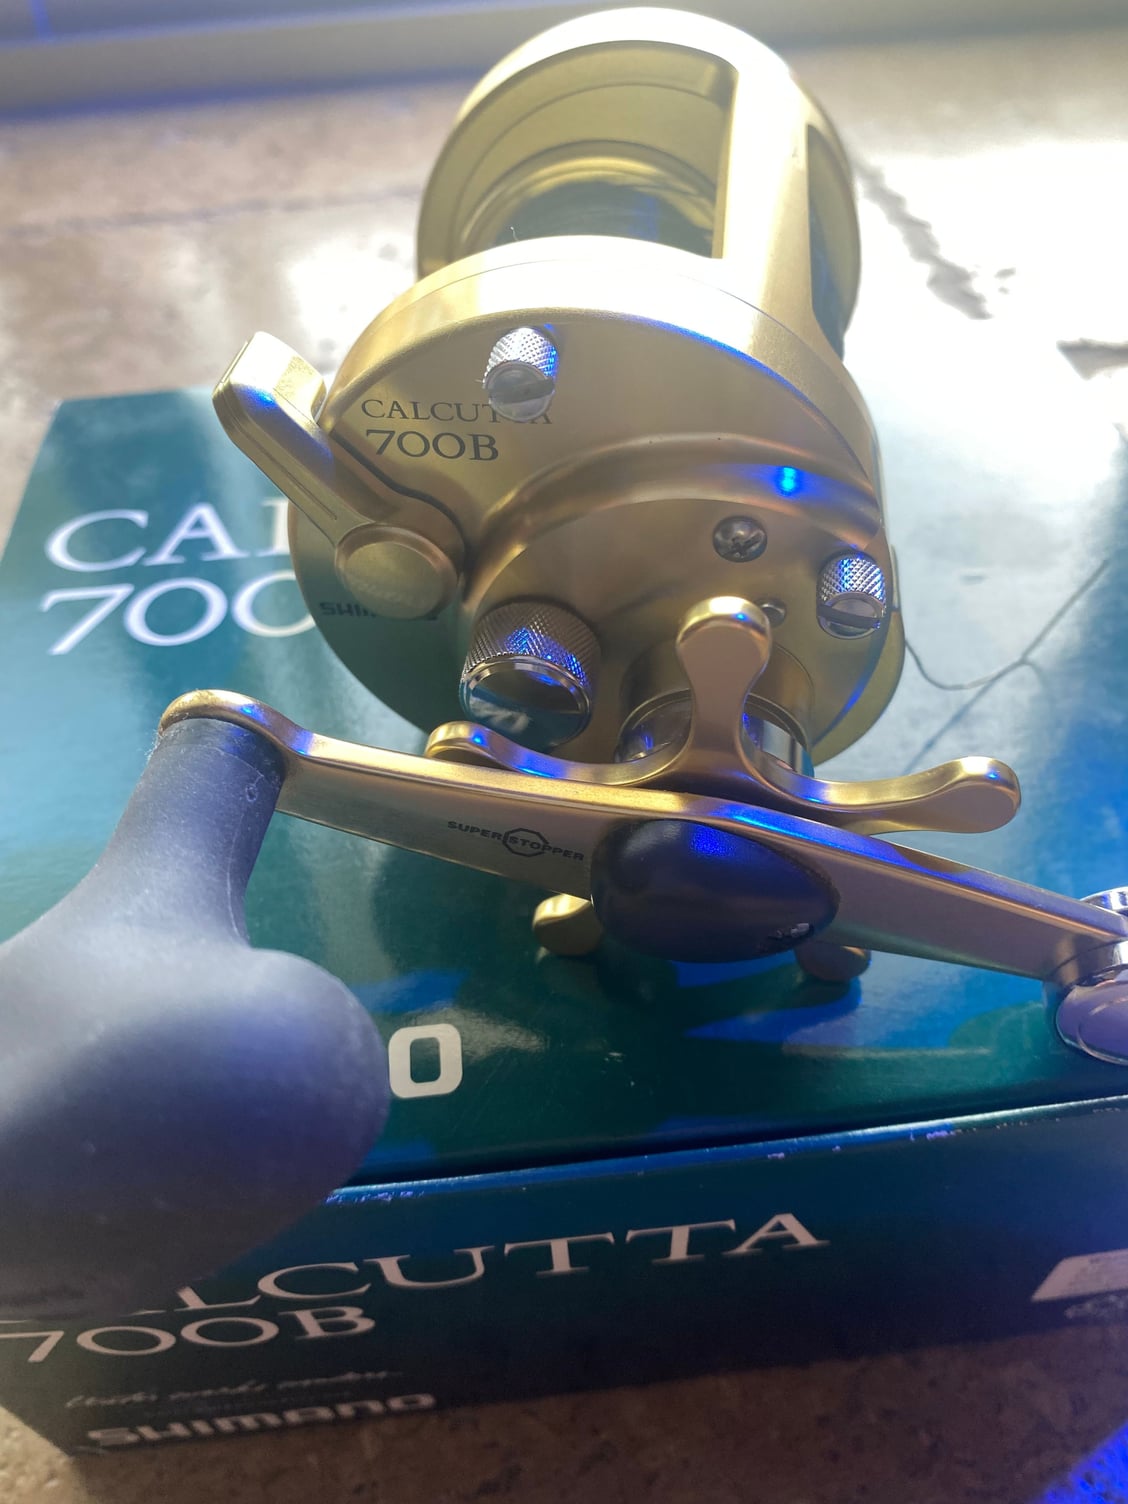 Shimano Calcutta TE 700 Reel For Sale ~ BRAND NEW!!! - The Hull Truth -  Boating and Fishing Forum